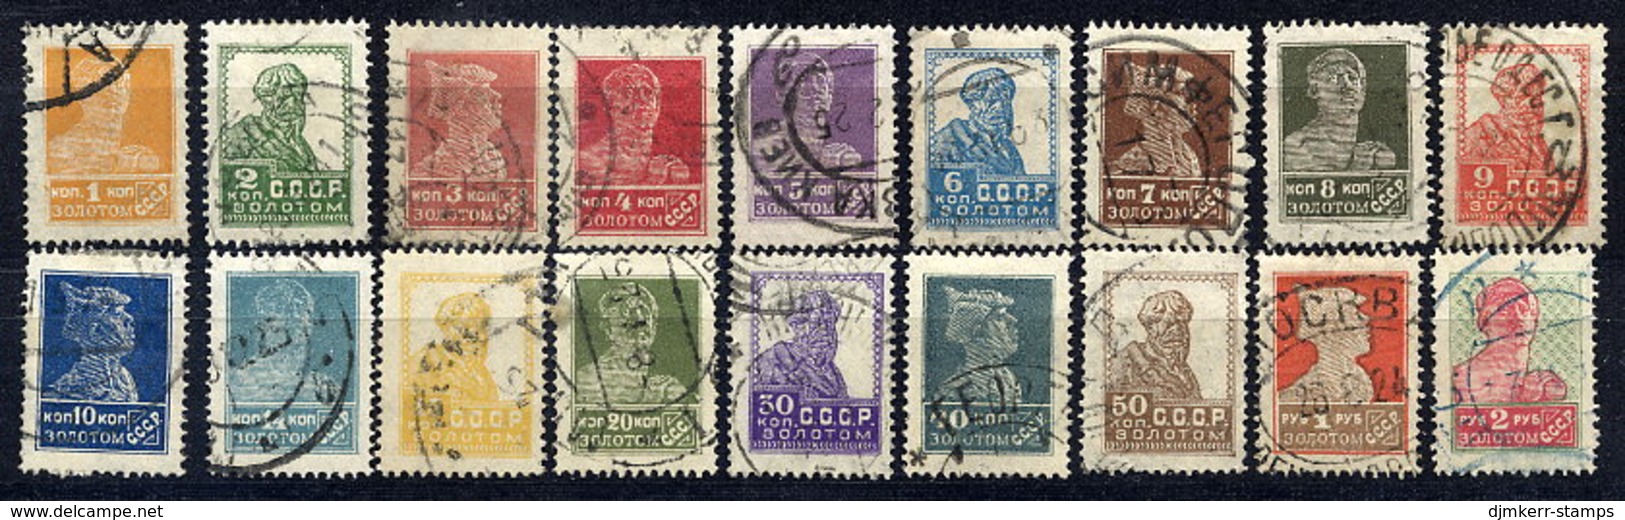 SOVIET UNION 1924-25 Definitive Complete To 2 R. Without Watermark Perforated 14½:14¾, Used.  Michel 242 I A - 259 I A. - Used Stamps